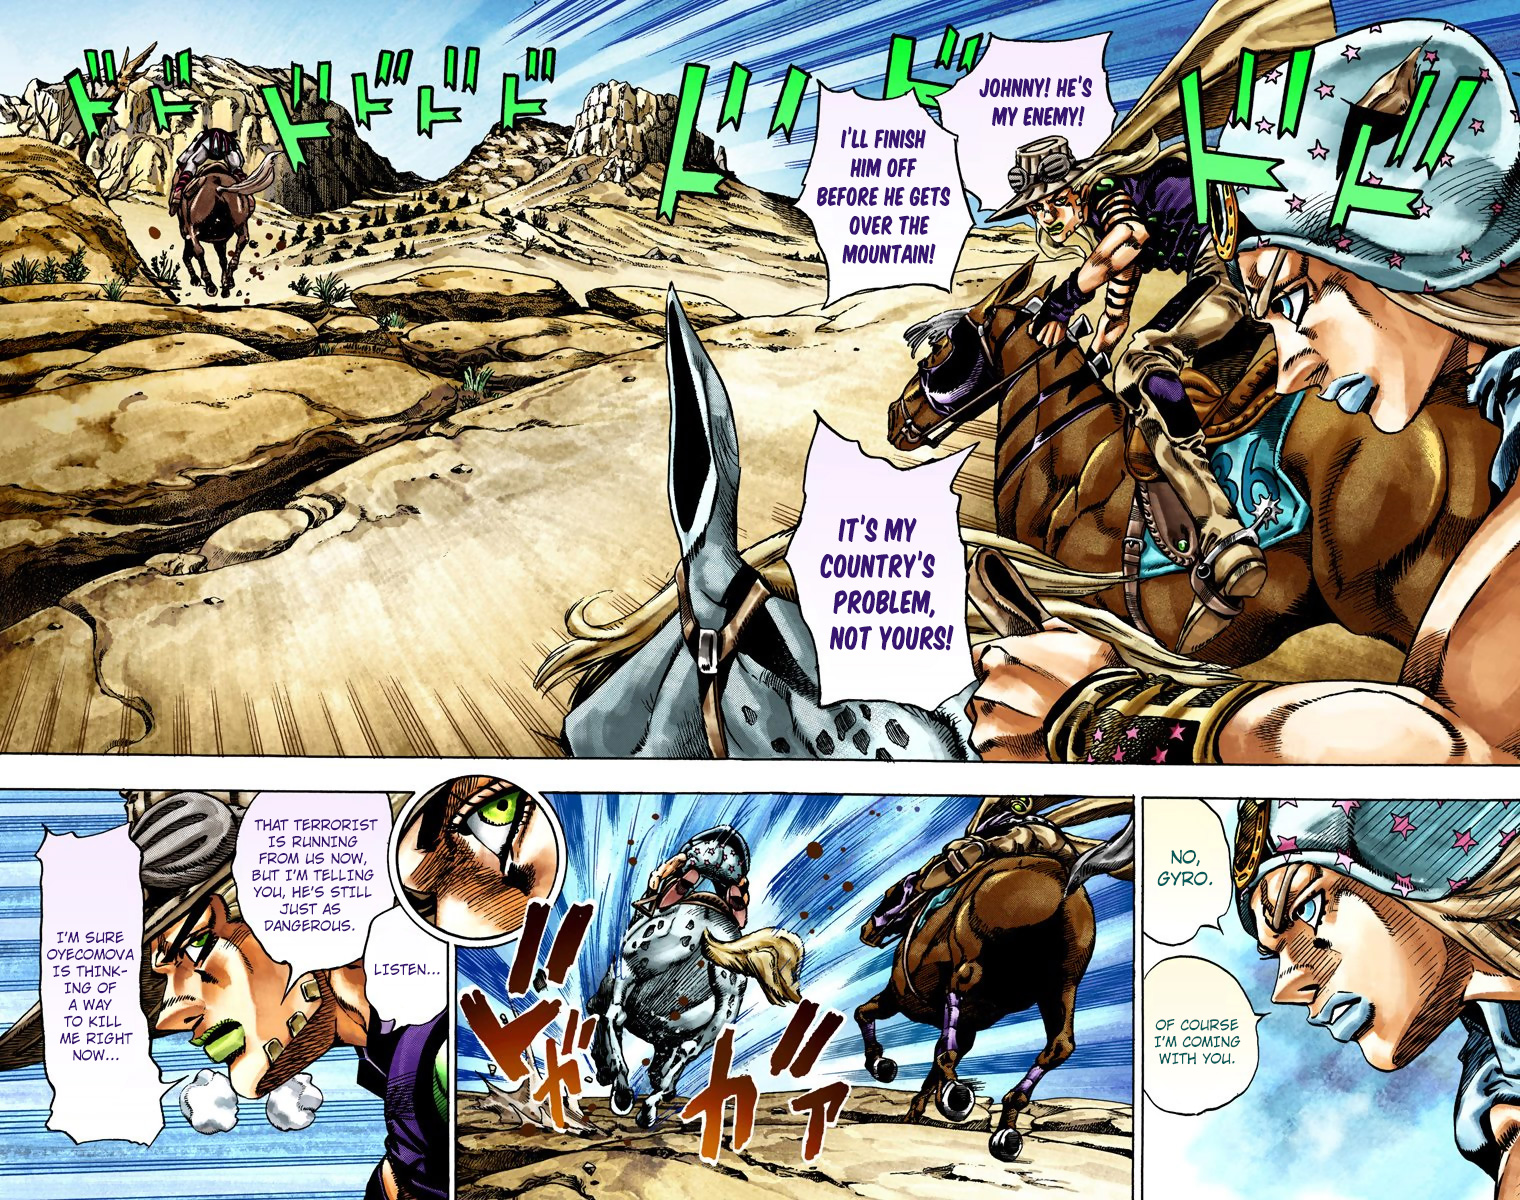 Jojo's Bizarre Adventure Part 7 - Steel Ball Run Vol.4 Chapter 23: The Terrorist From A Far Off Country Part 2 - Picture 3